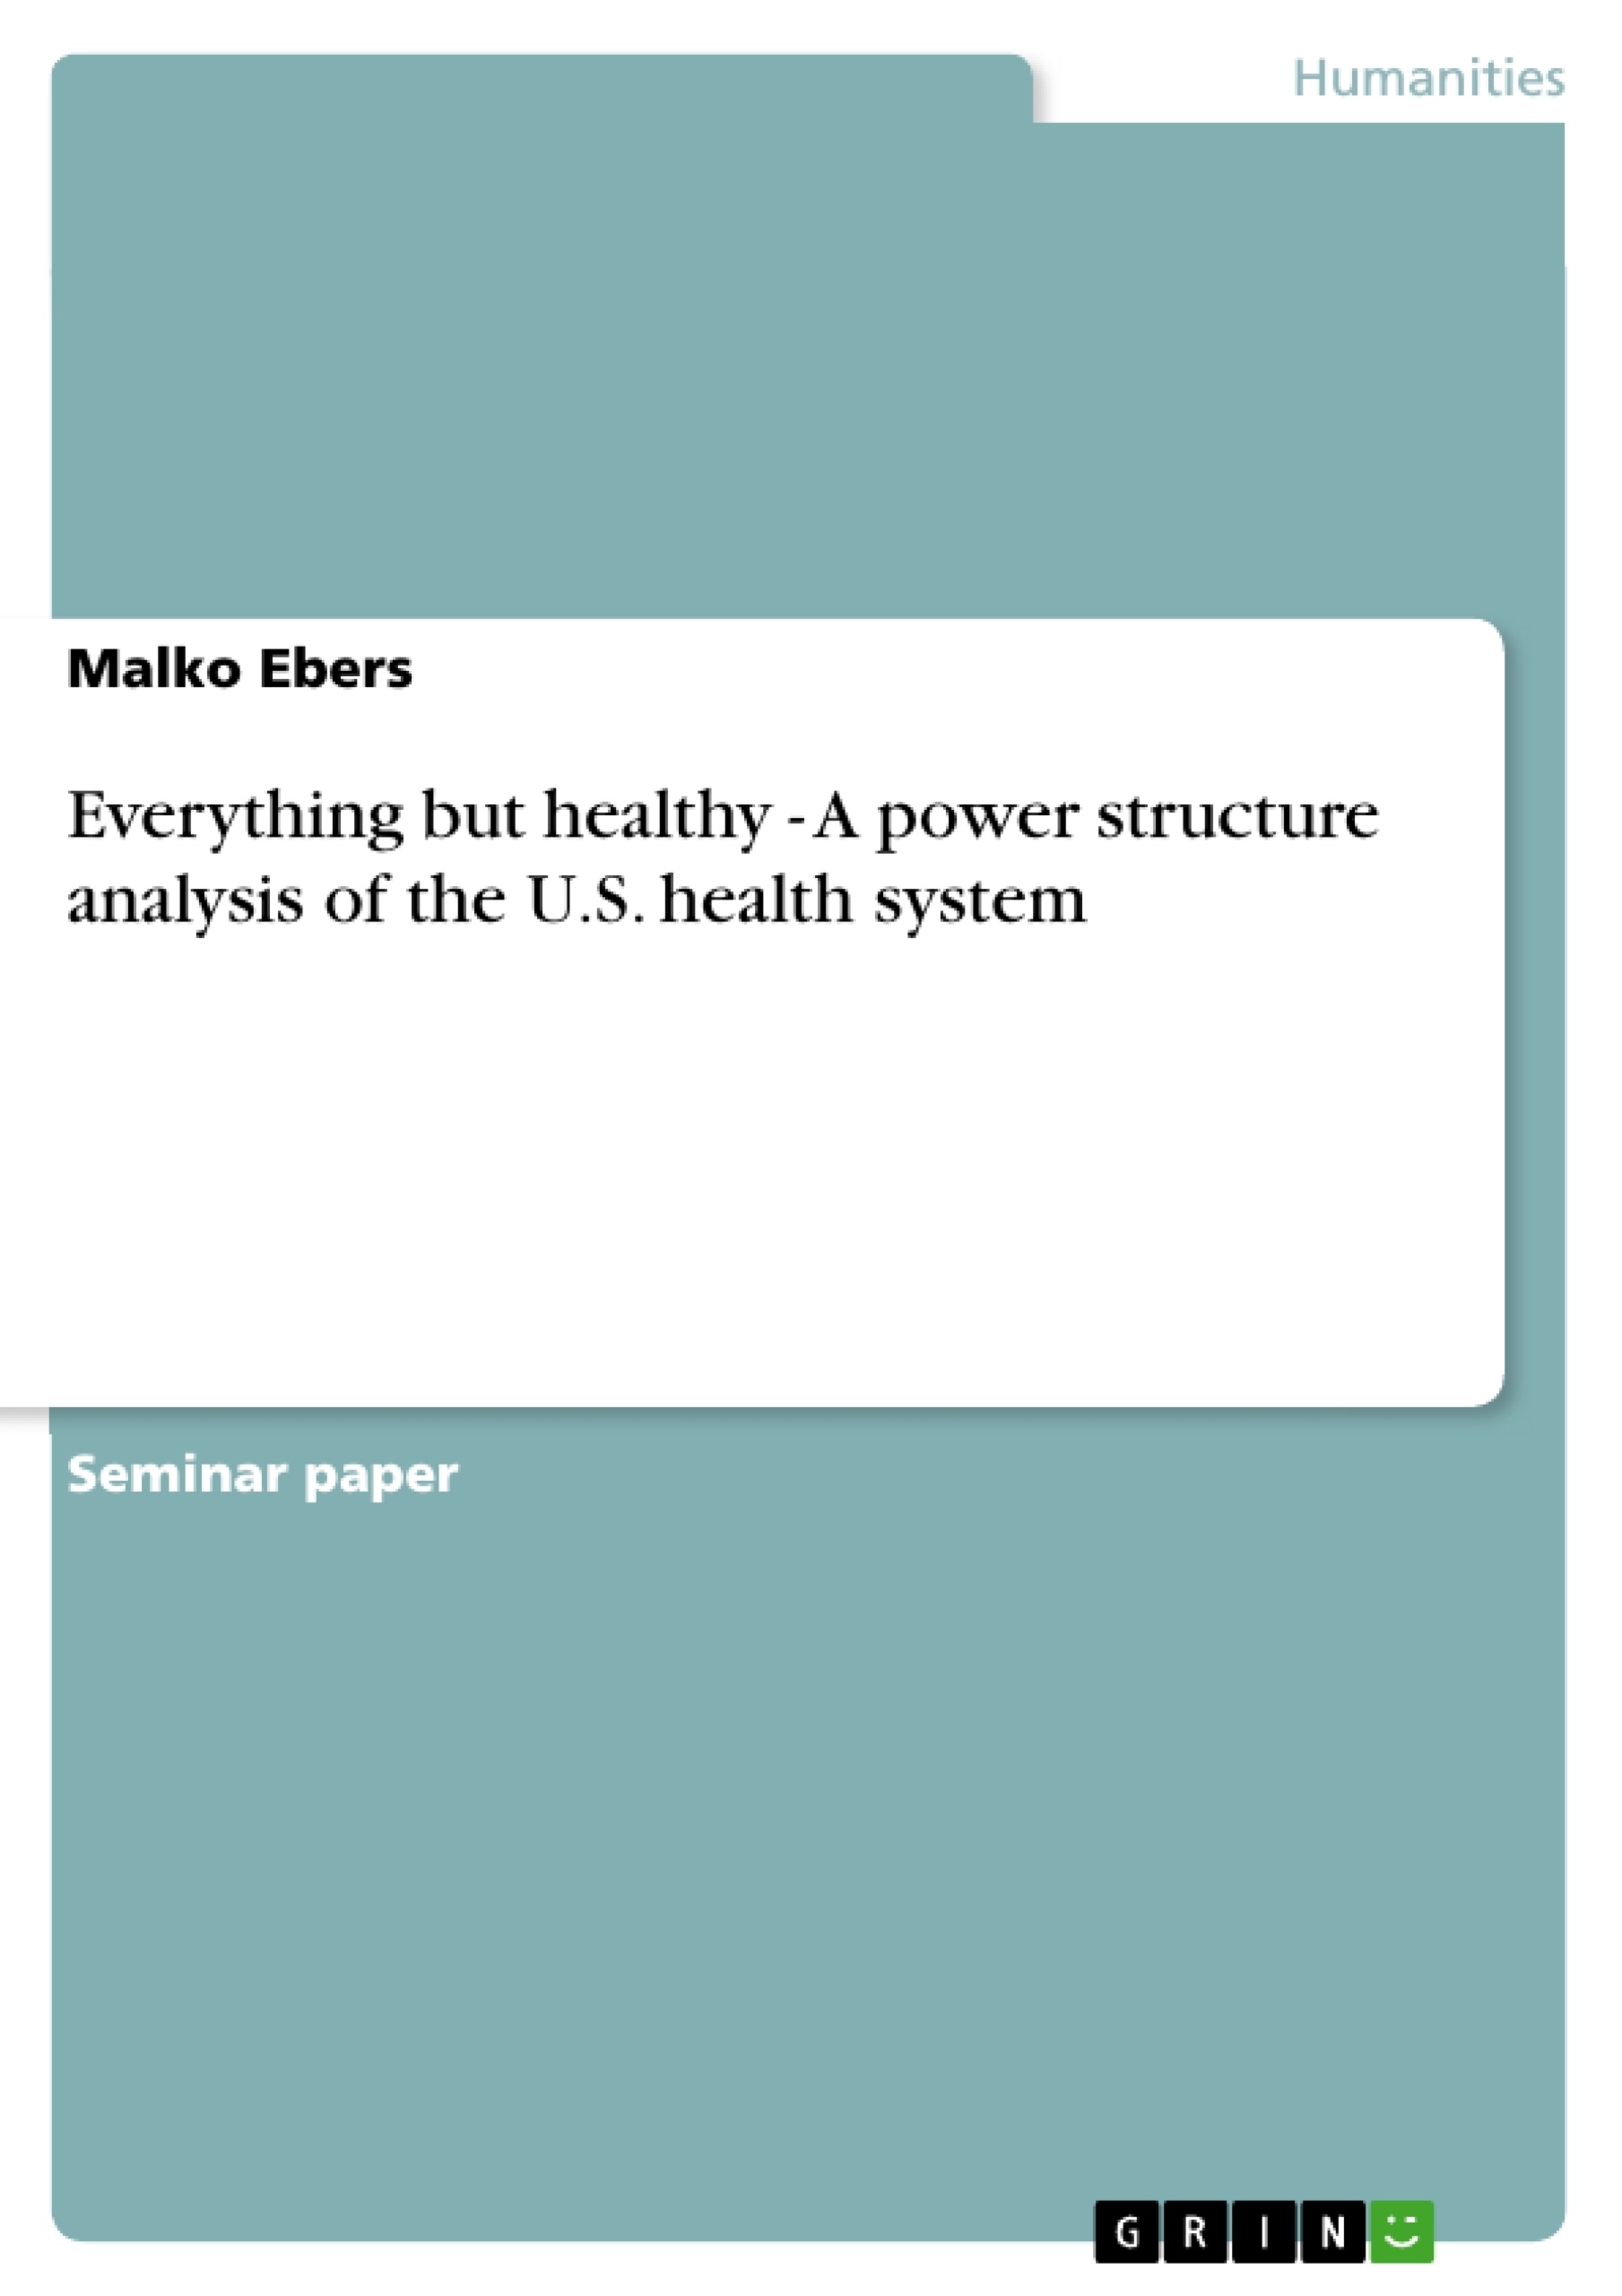 Title: Everything but healthy - A power structure analysis of the U.S. health system